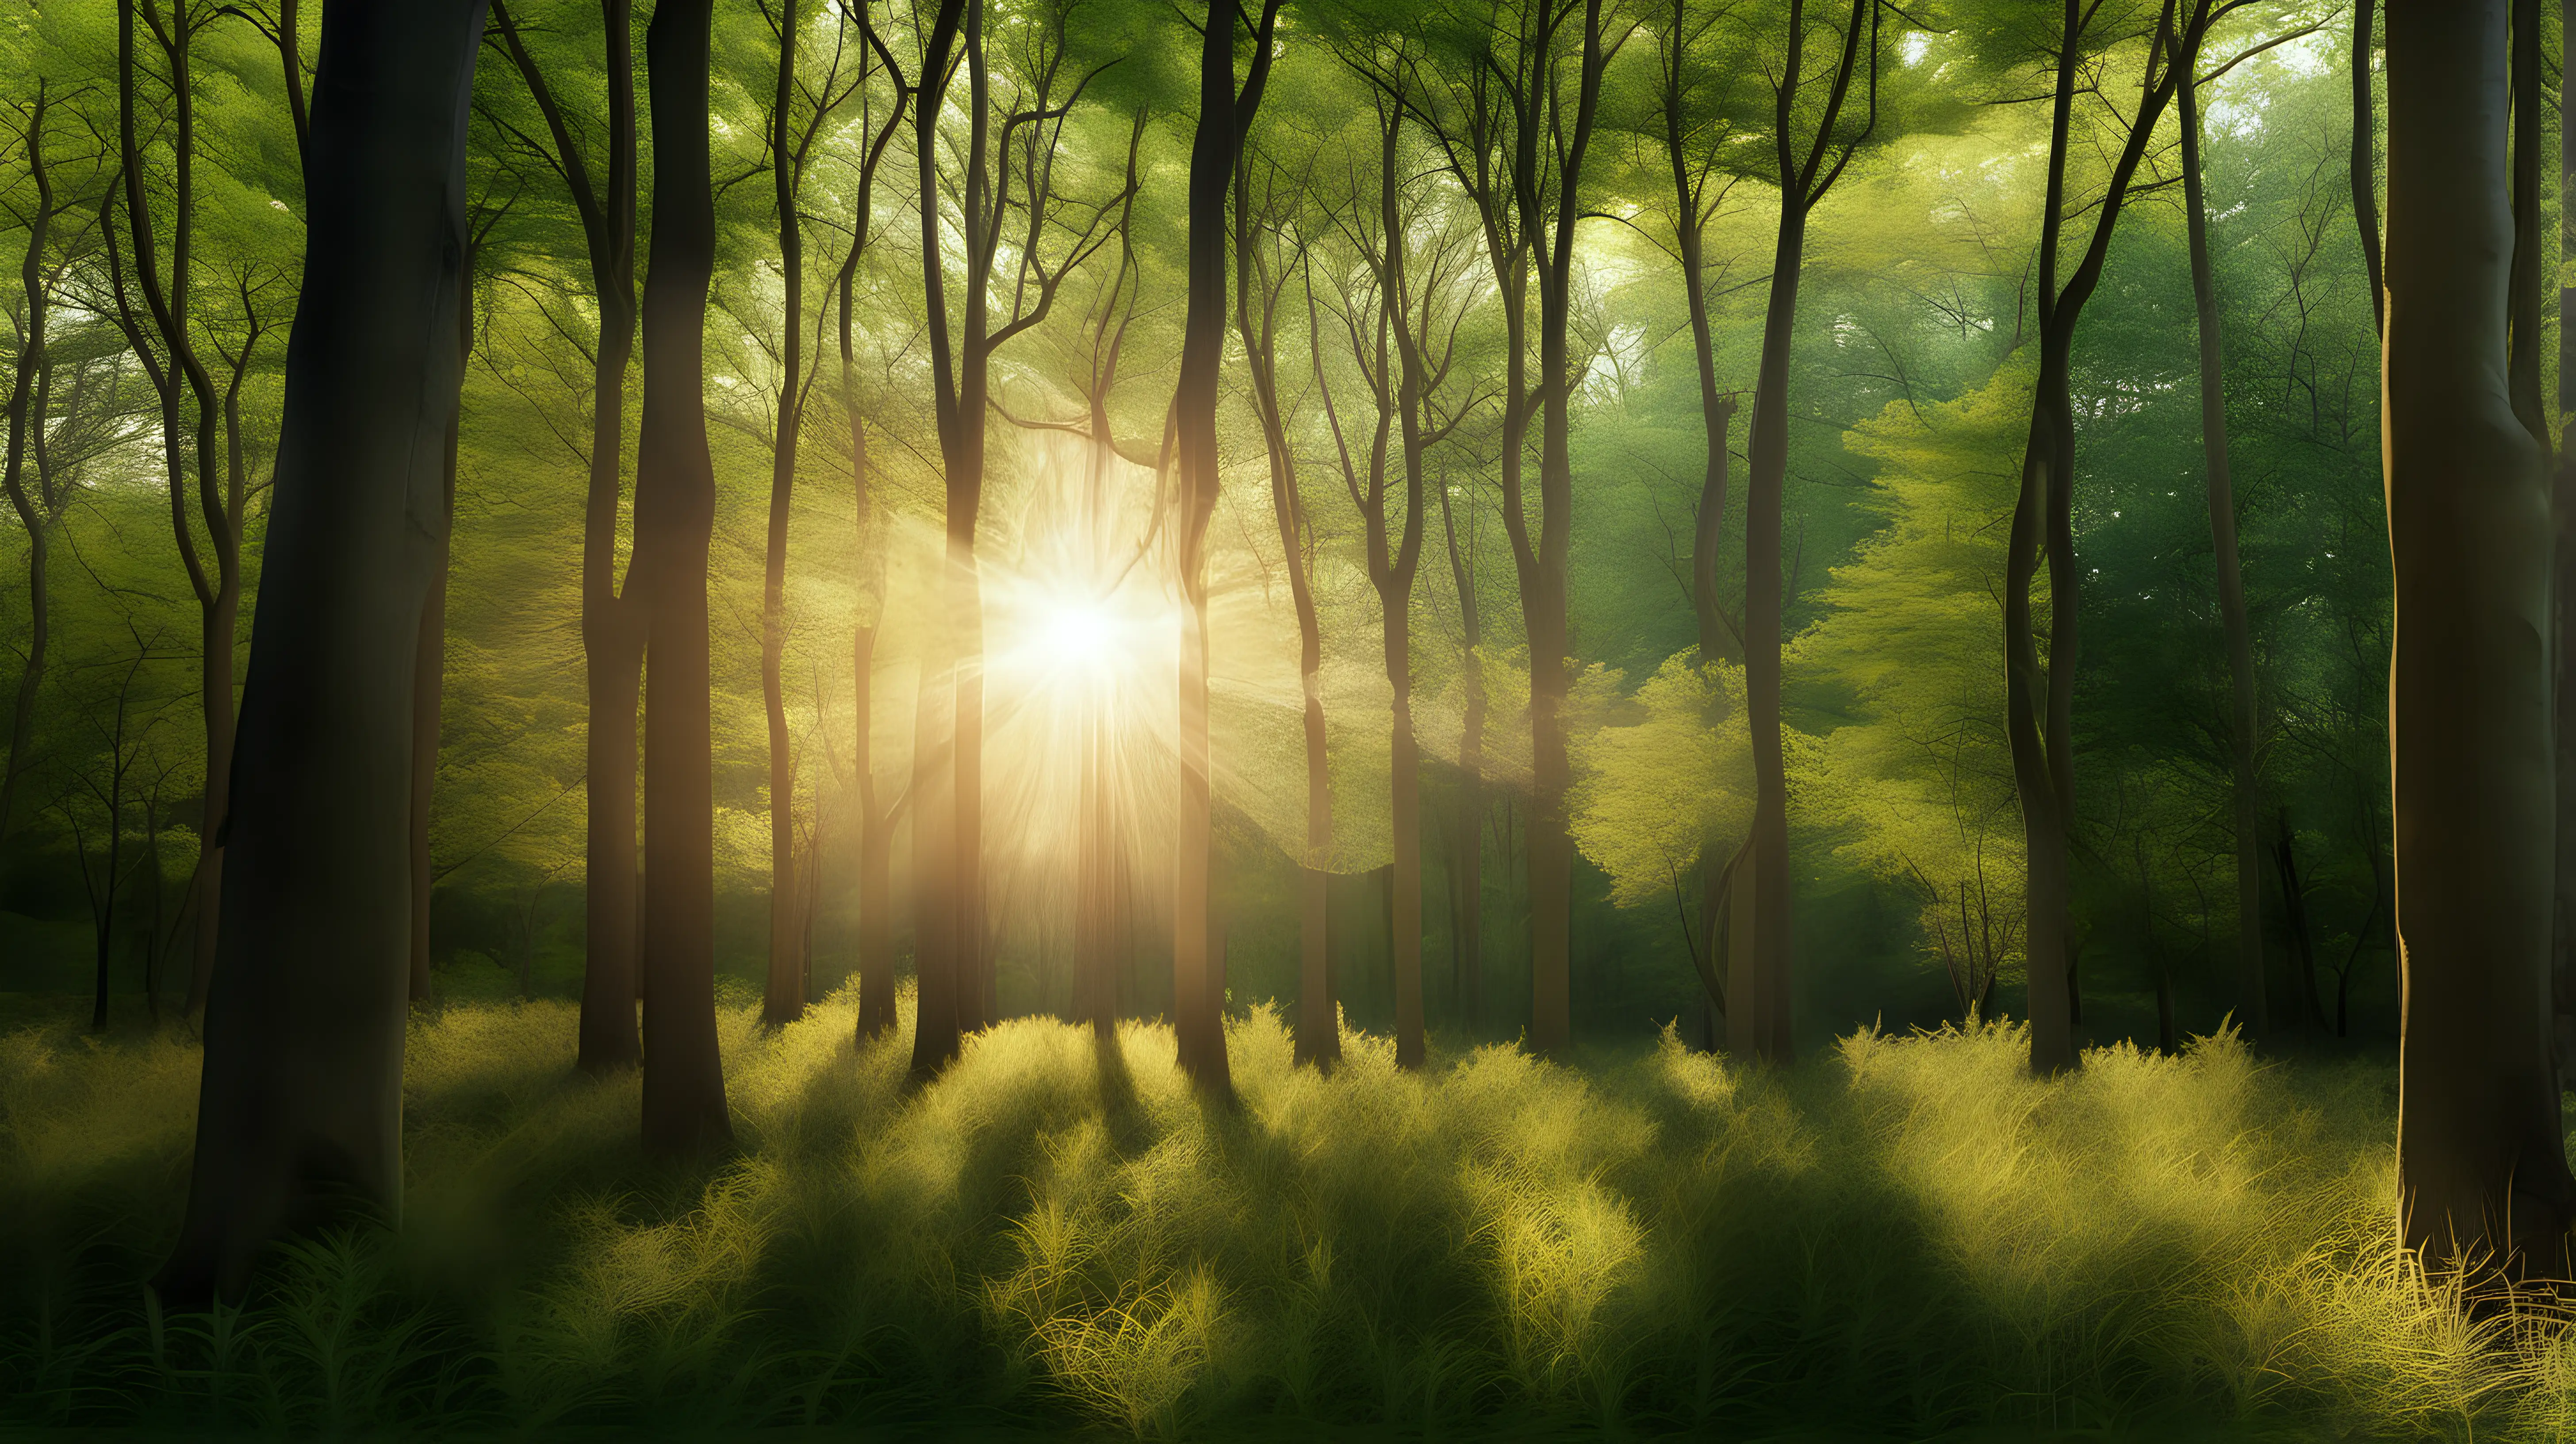 A tranquil forest clearing with the sun setting behind a canopy of trees, casting dappled light.